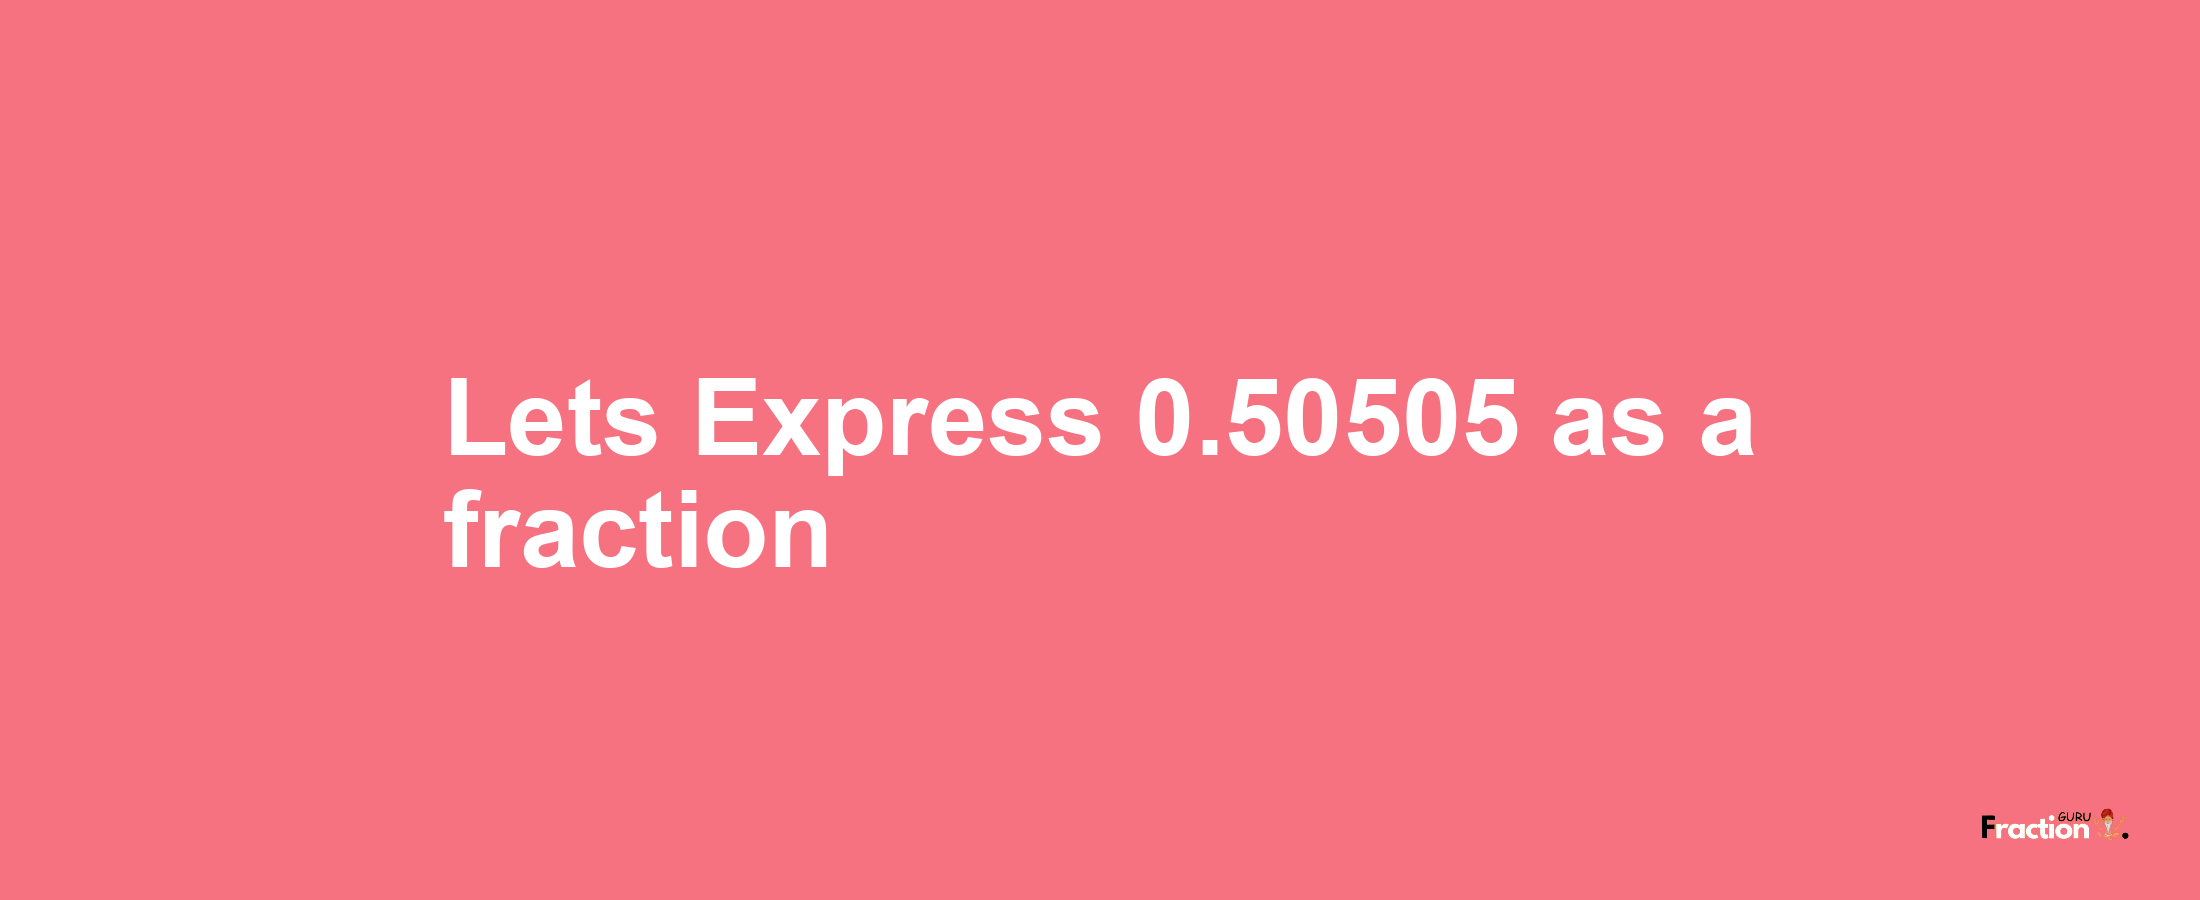 Lets Express 0.50505 as afraction